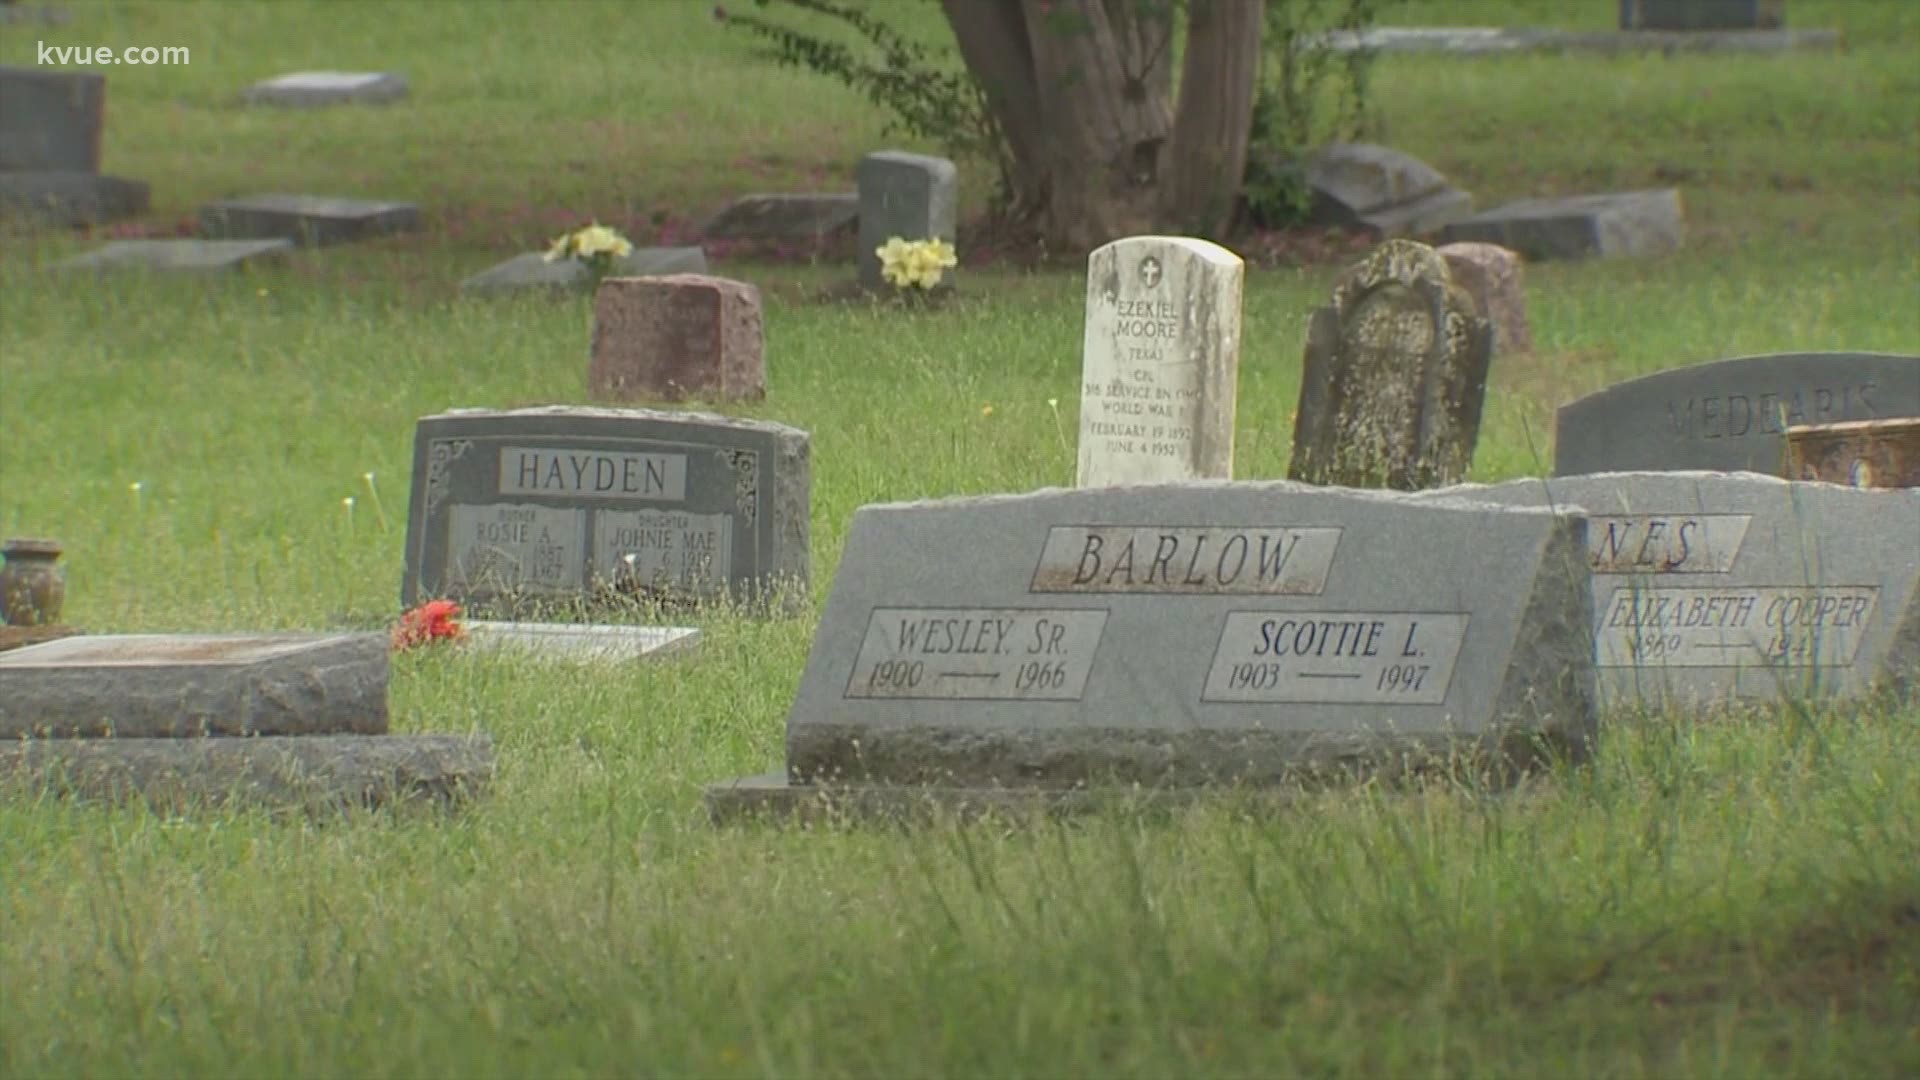 Austin police are looking for the vandals who tagged headstones at Evergreen Cemetery in East Austin.